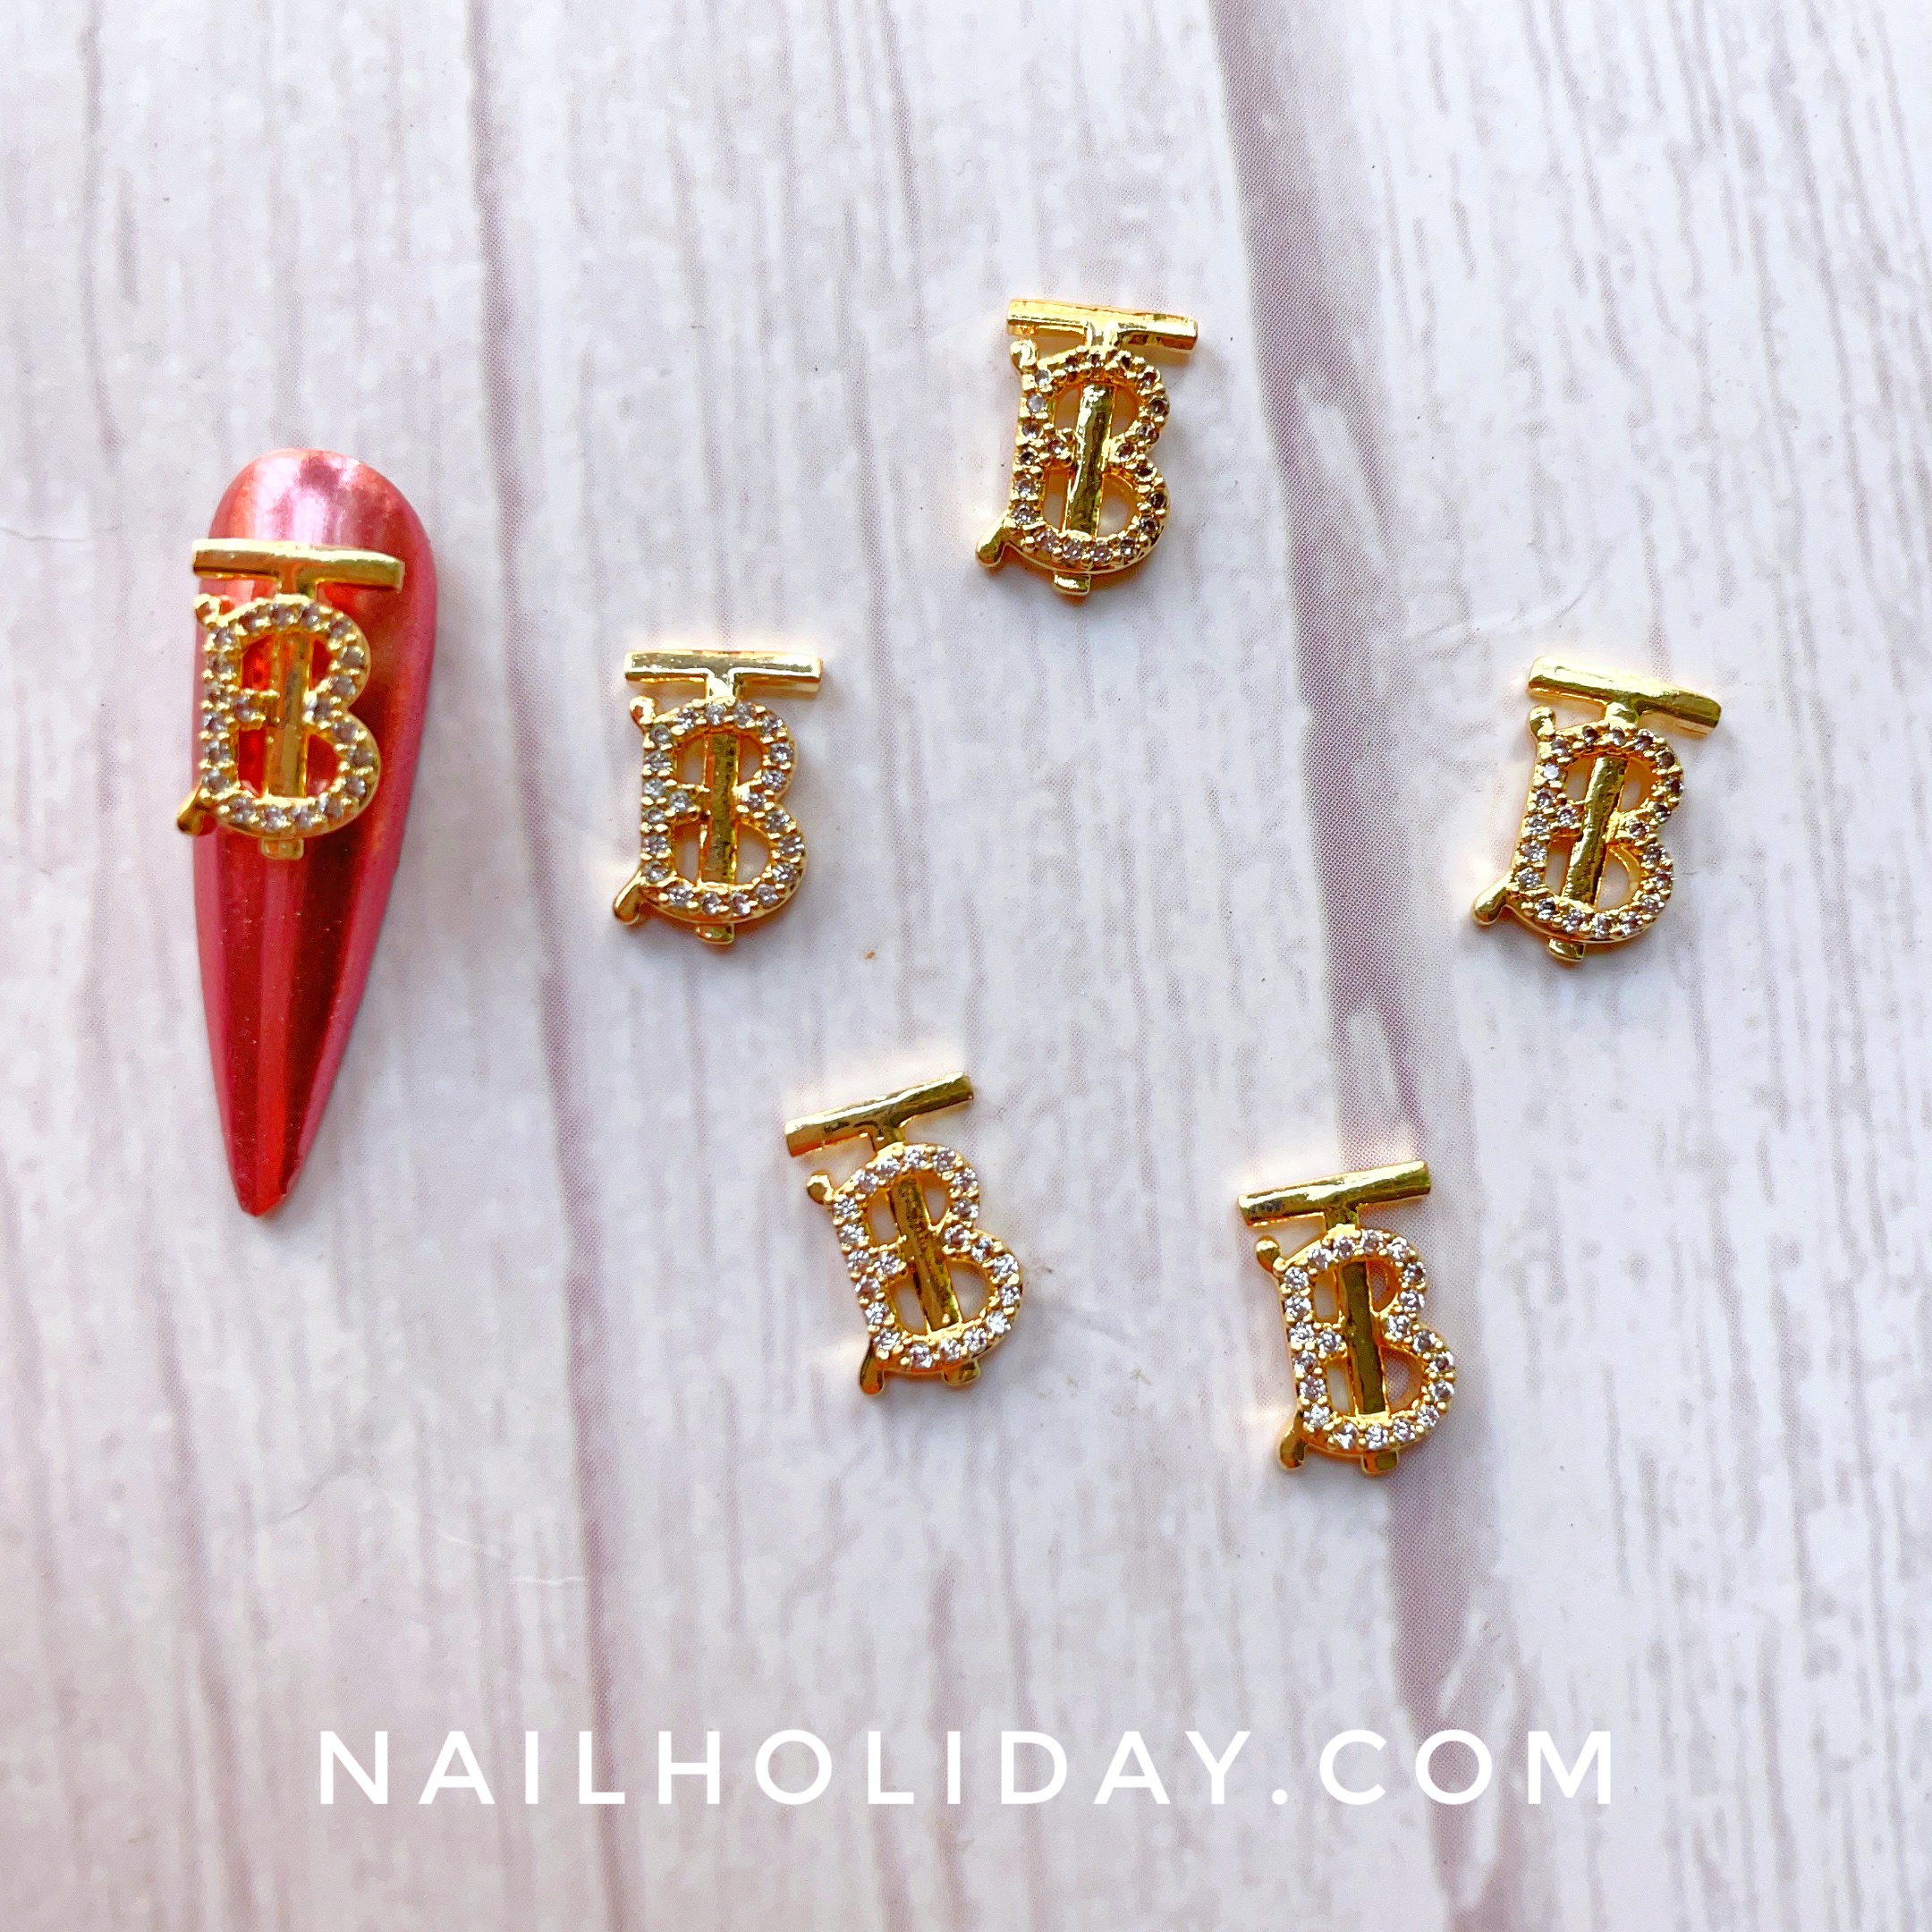 Burberry nail charms gold